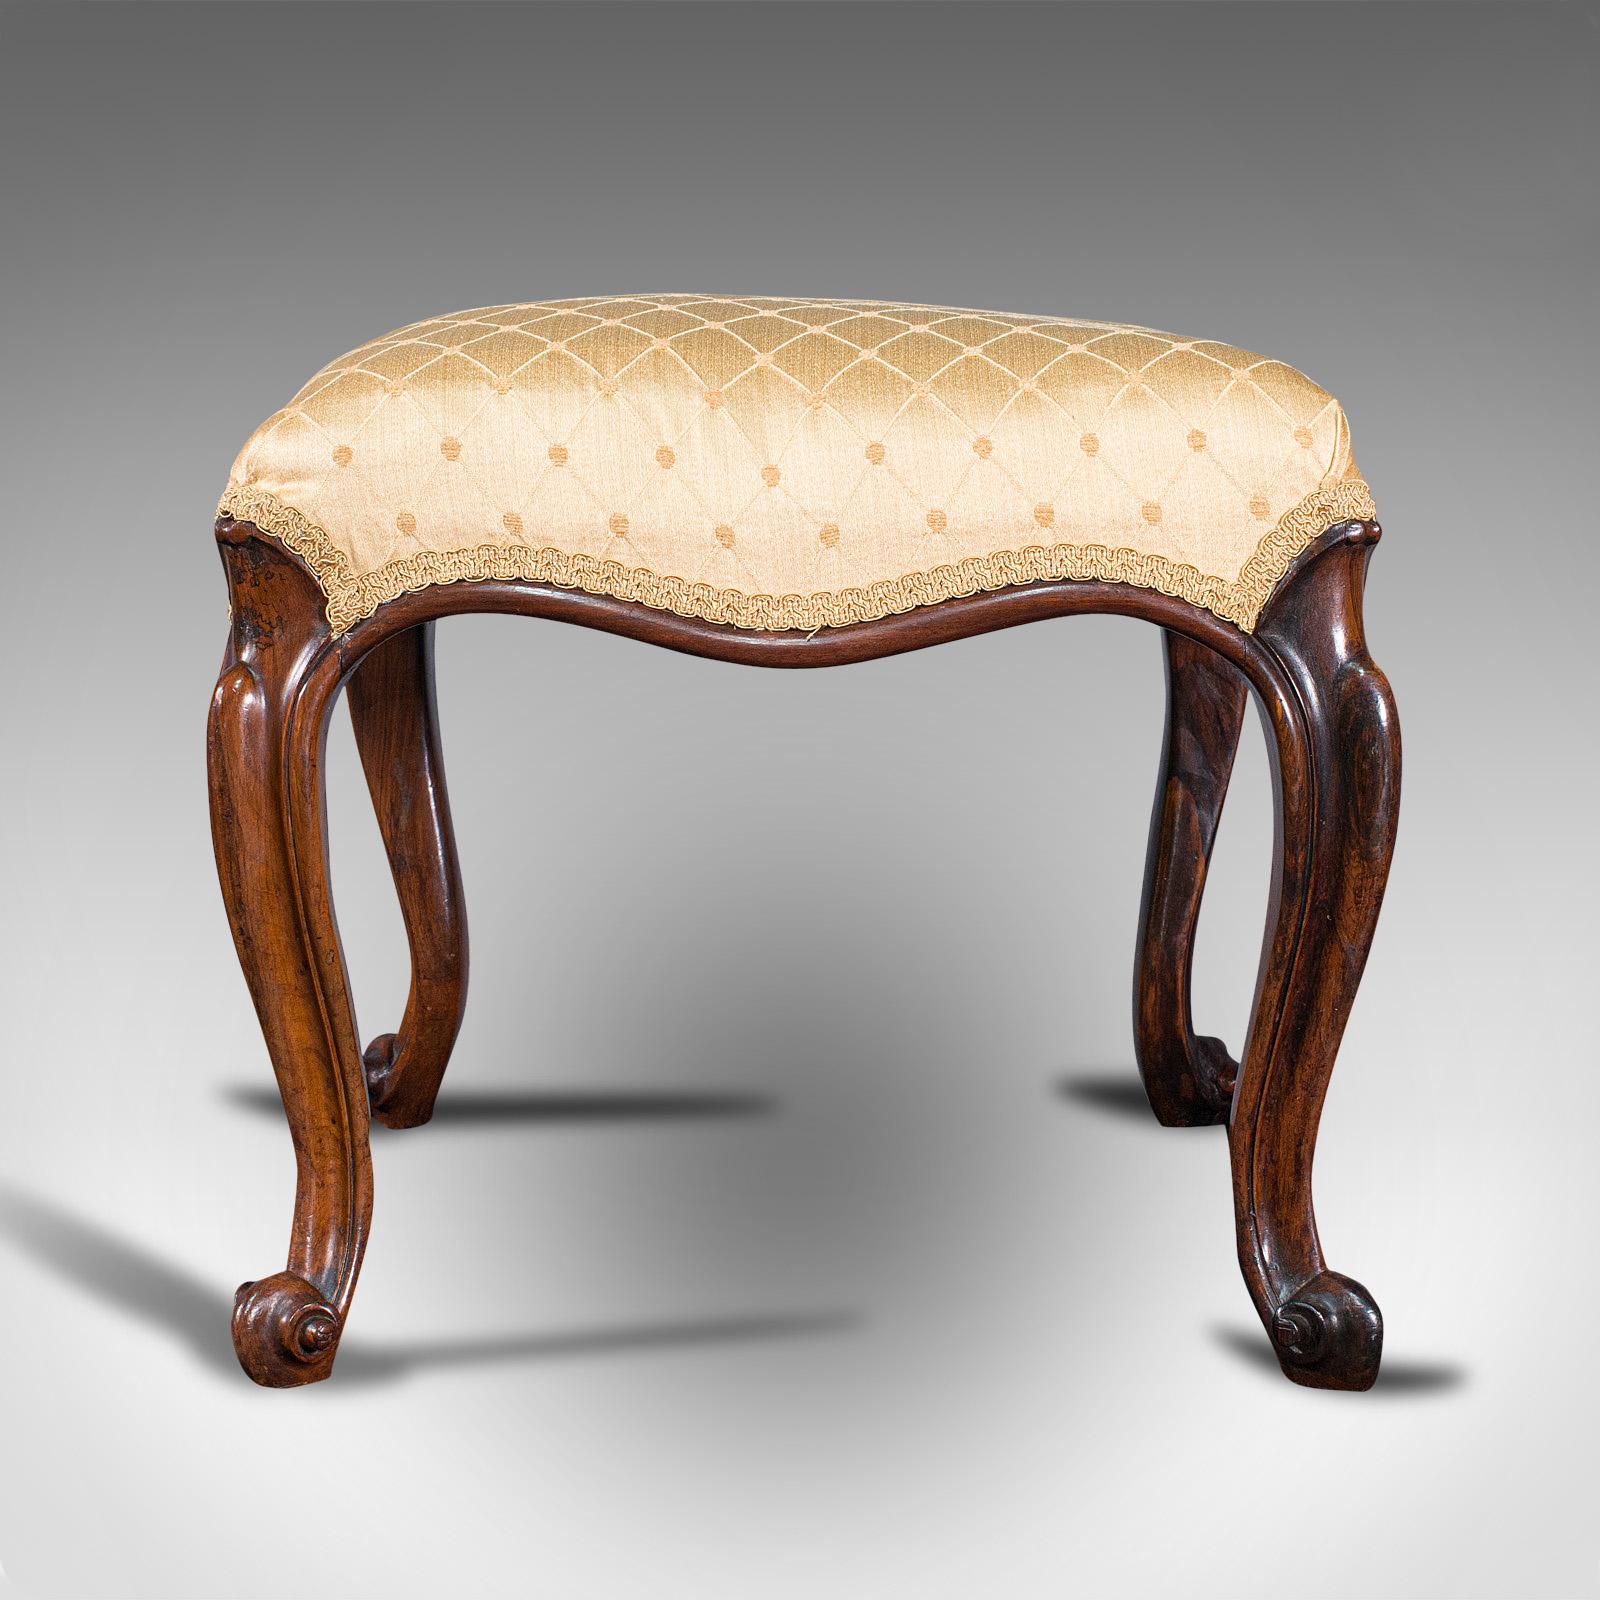 This is an antique dressing stool. An English, walnut and upholstery boudoir seat, dating to the Regency period, circa 1820.

Delectable Regency period elegance
Displays a desirable aged patina and in good order
Select walnut presents fine grain